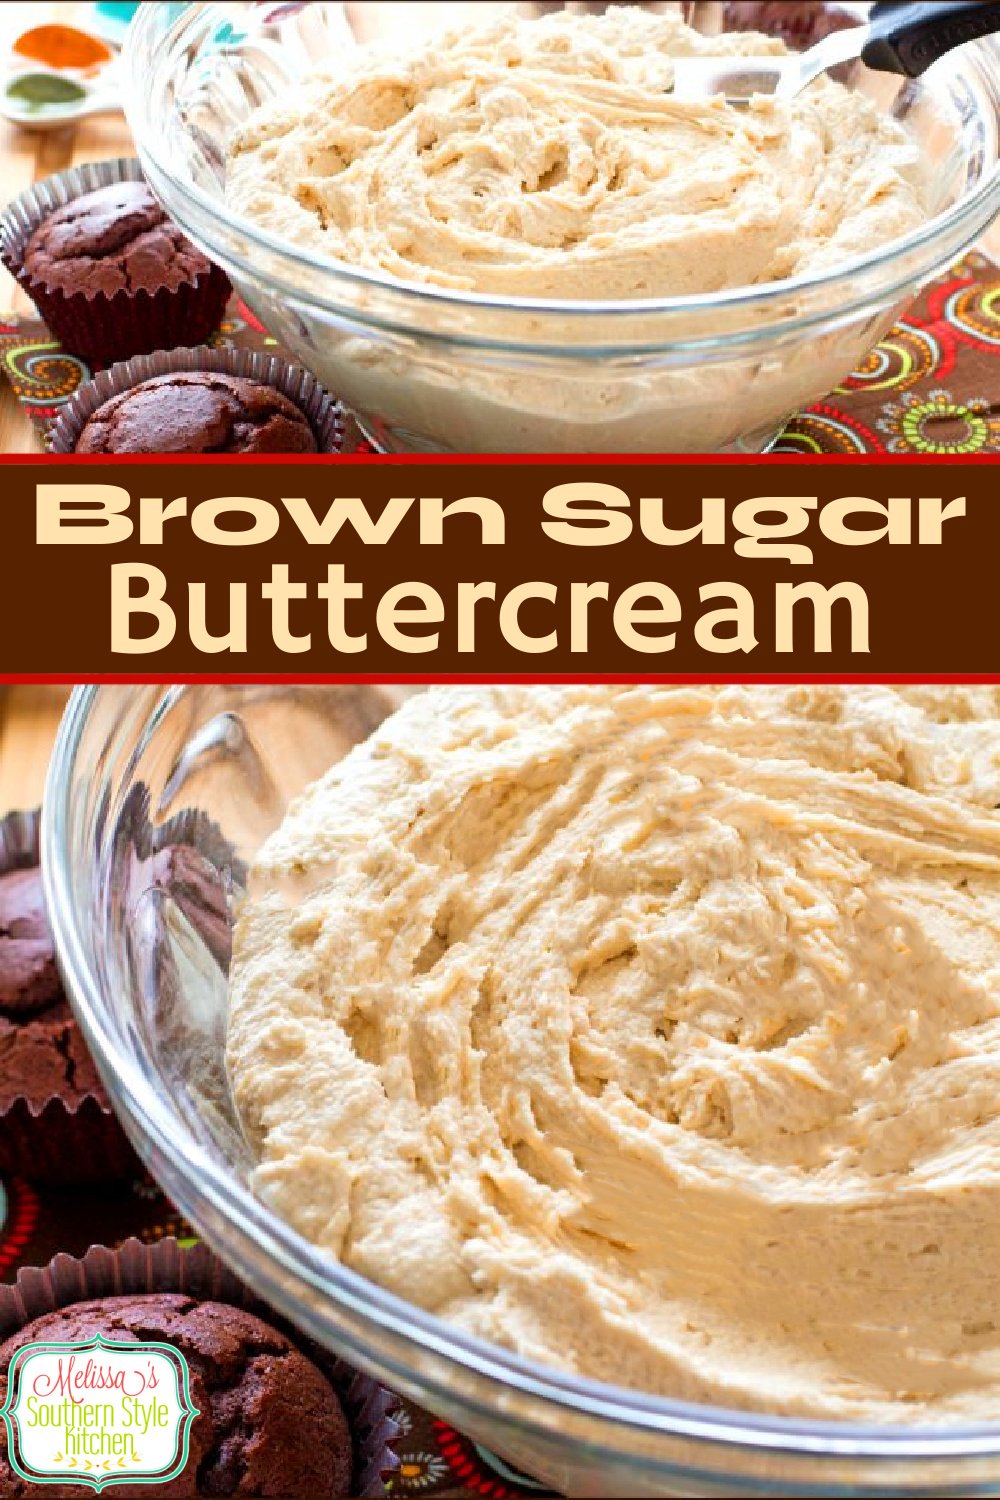 You'll elevate your cake frostings with this rich and buttery homemade Brown Sugar Buttercream for slathering on cakes, cupcakes and muffins. #brownsugarfrosting #brownsugarbuttercream #buttercreamrecipes #cakefrosting #icingrecipes #desserts #southernrecipes via @melissasssk